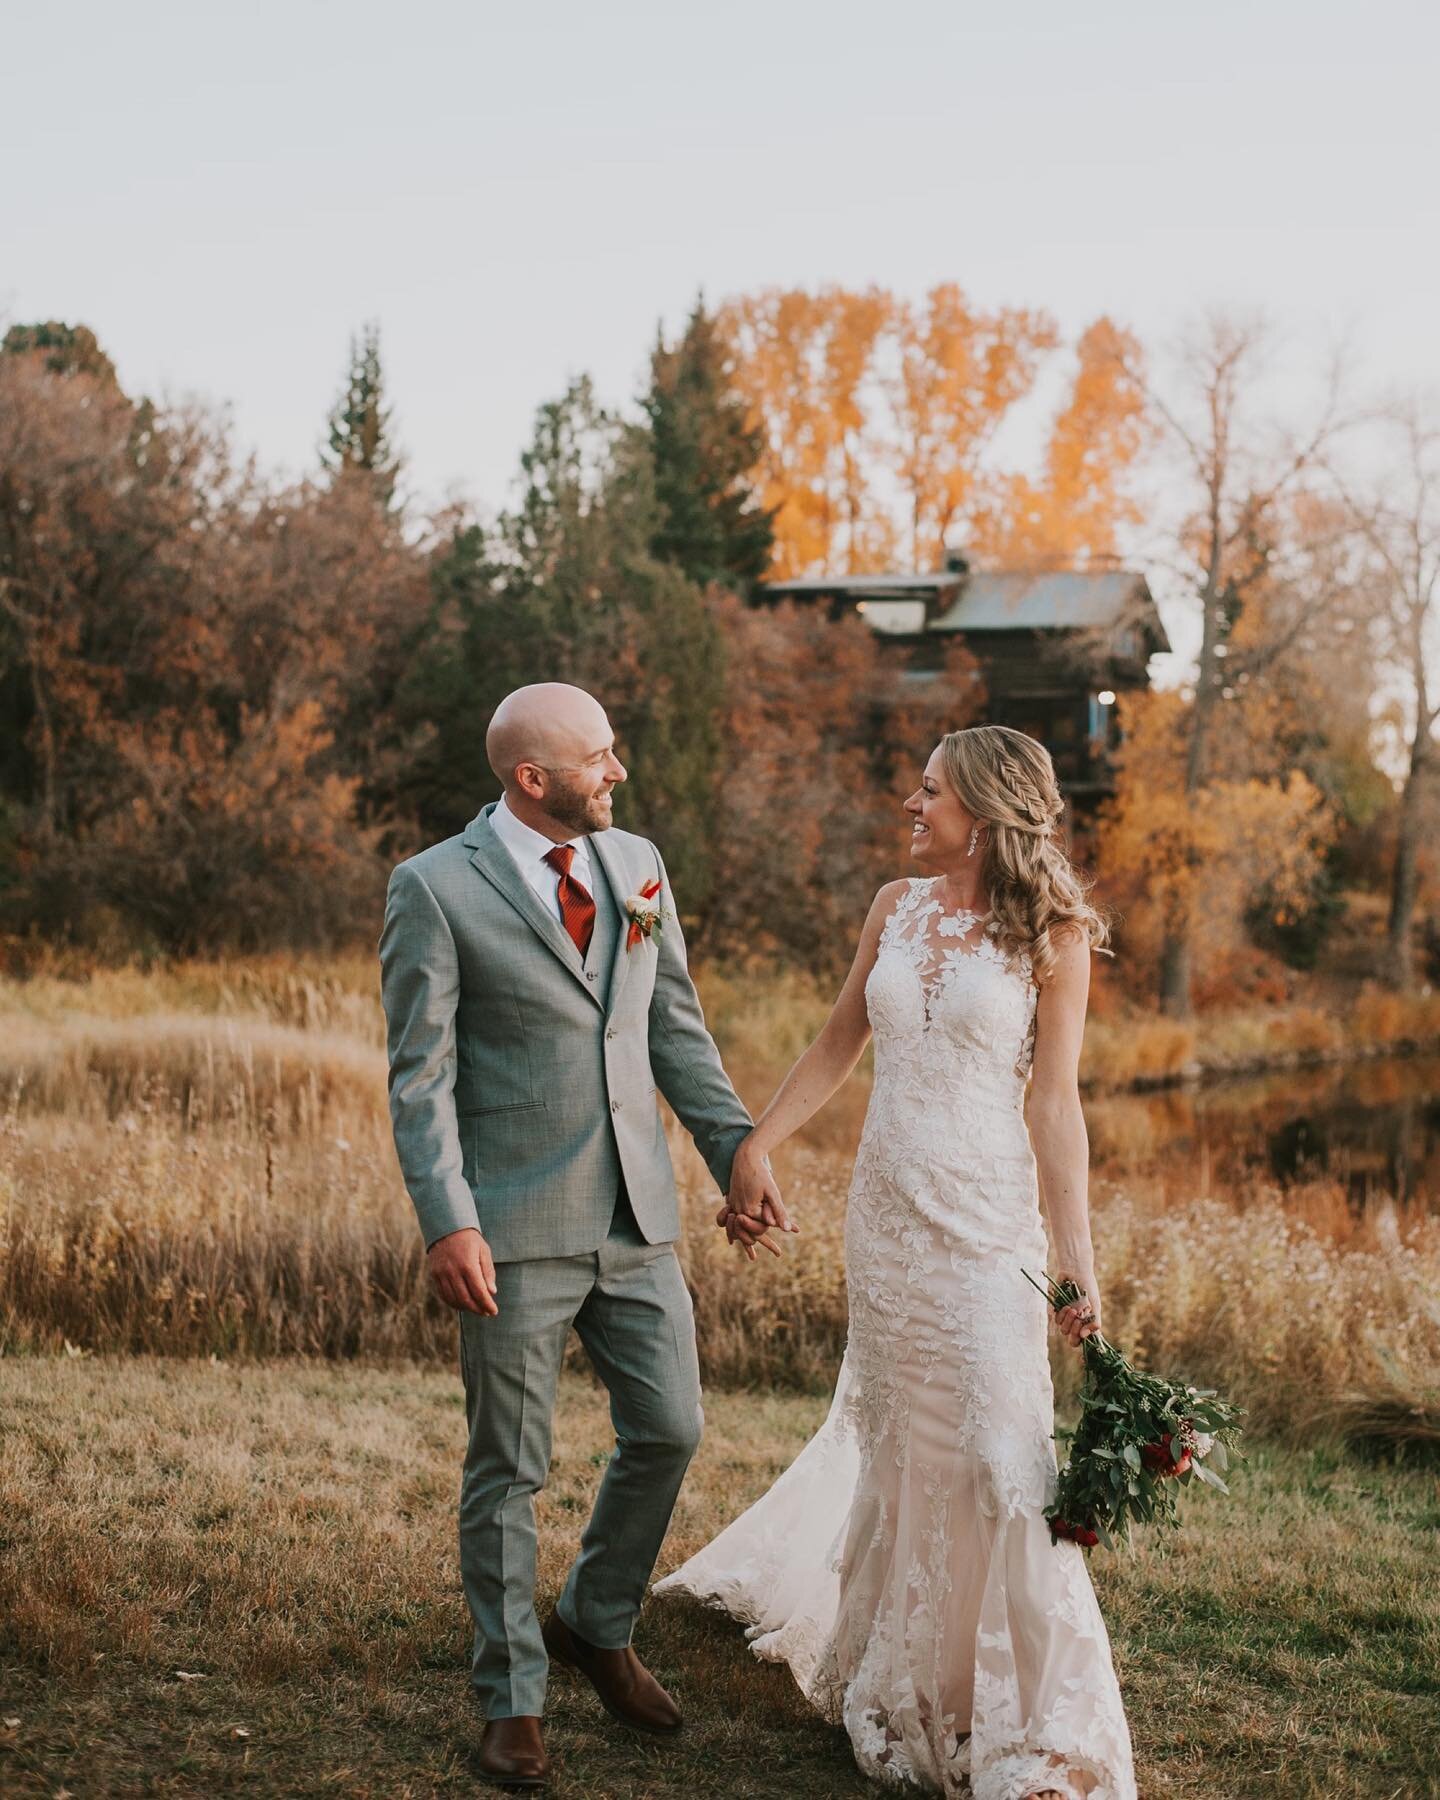 Soaked up the last of fall with Alison + Vince at the perfect property in Southwest Colorado. These moments and this light was a dream. 

#coloradowedding #coloradoweddingphotographer #coloradoweddingvenues #weddingphotography #durangophotographer #s